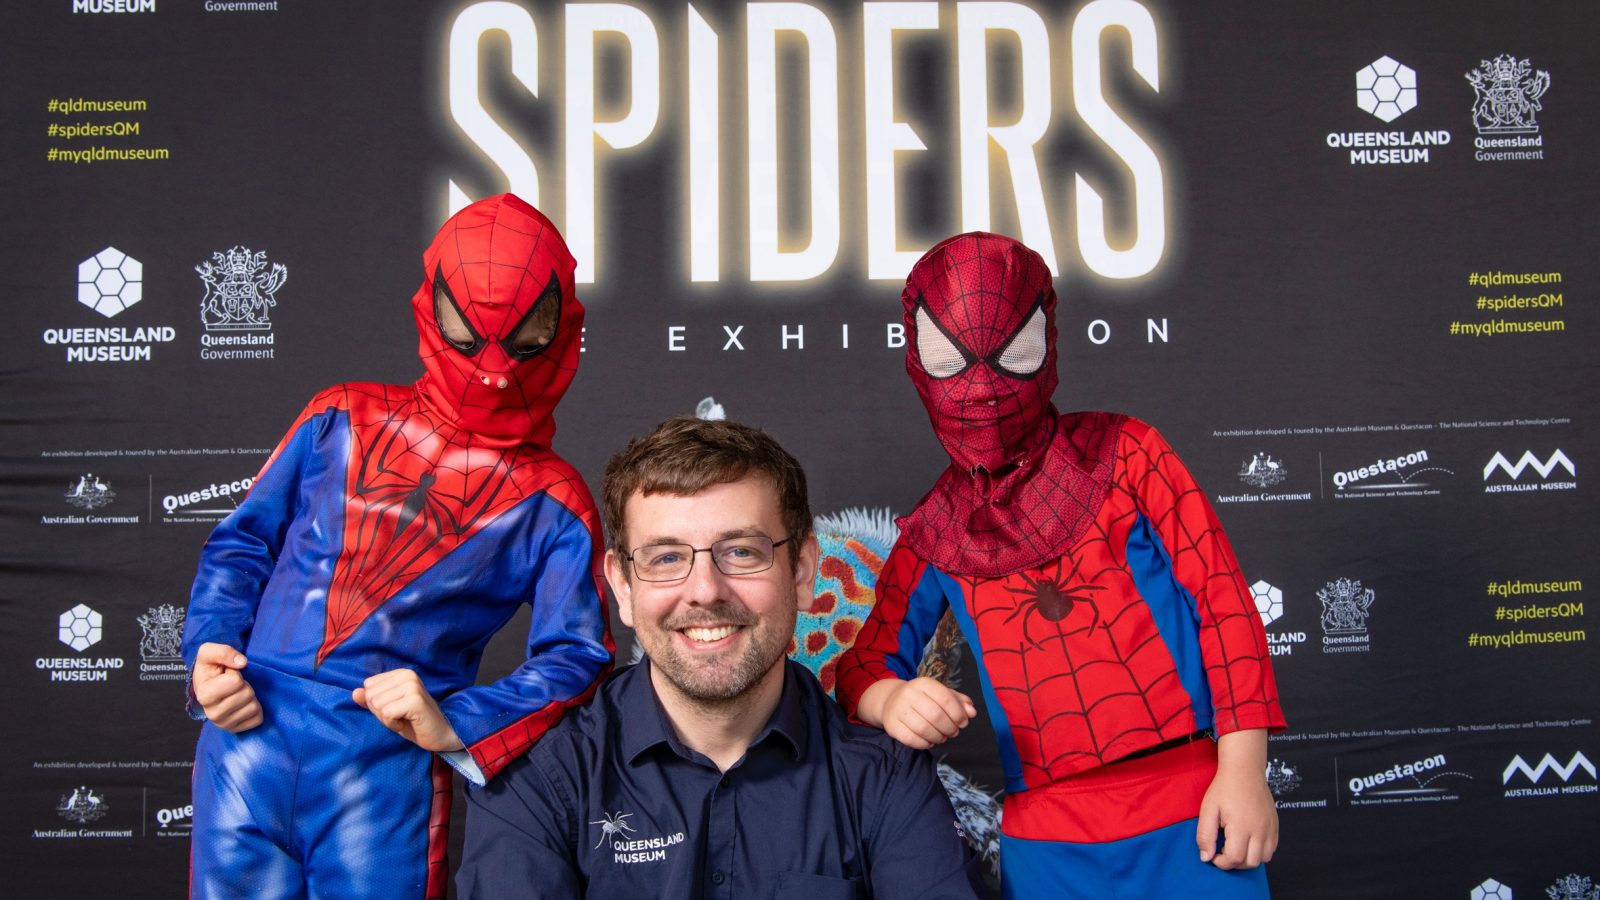 Spiders – The Exhibition